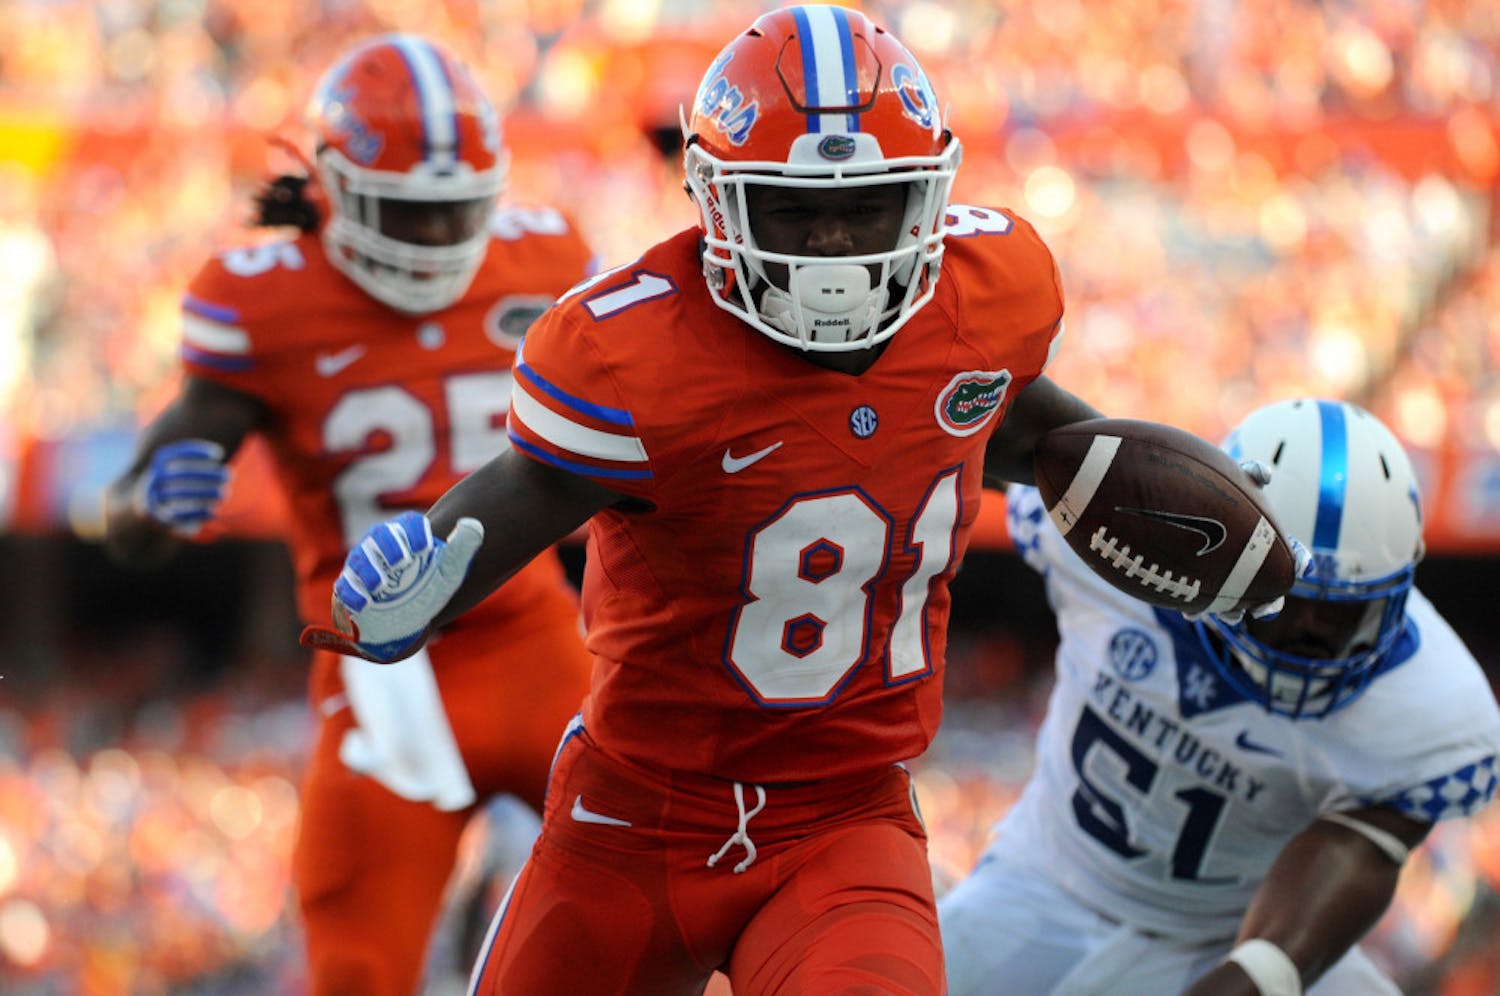 Antonio Callaway runs with the ball during Florida's 45-7 win over Kentucky on Sept. 10, 2016, at Ben Hill Griffin Stadium.